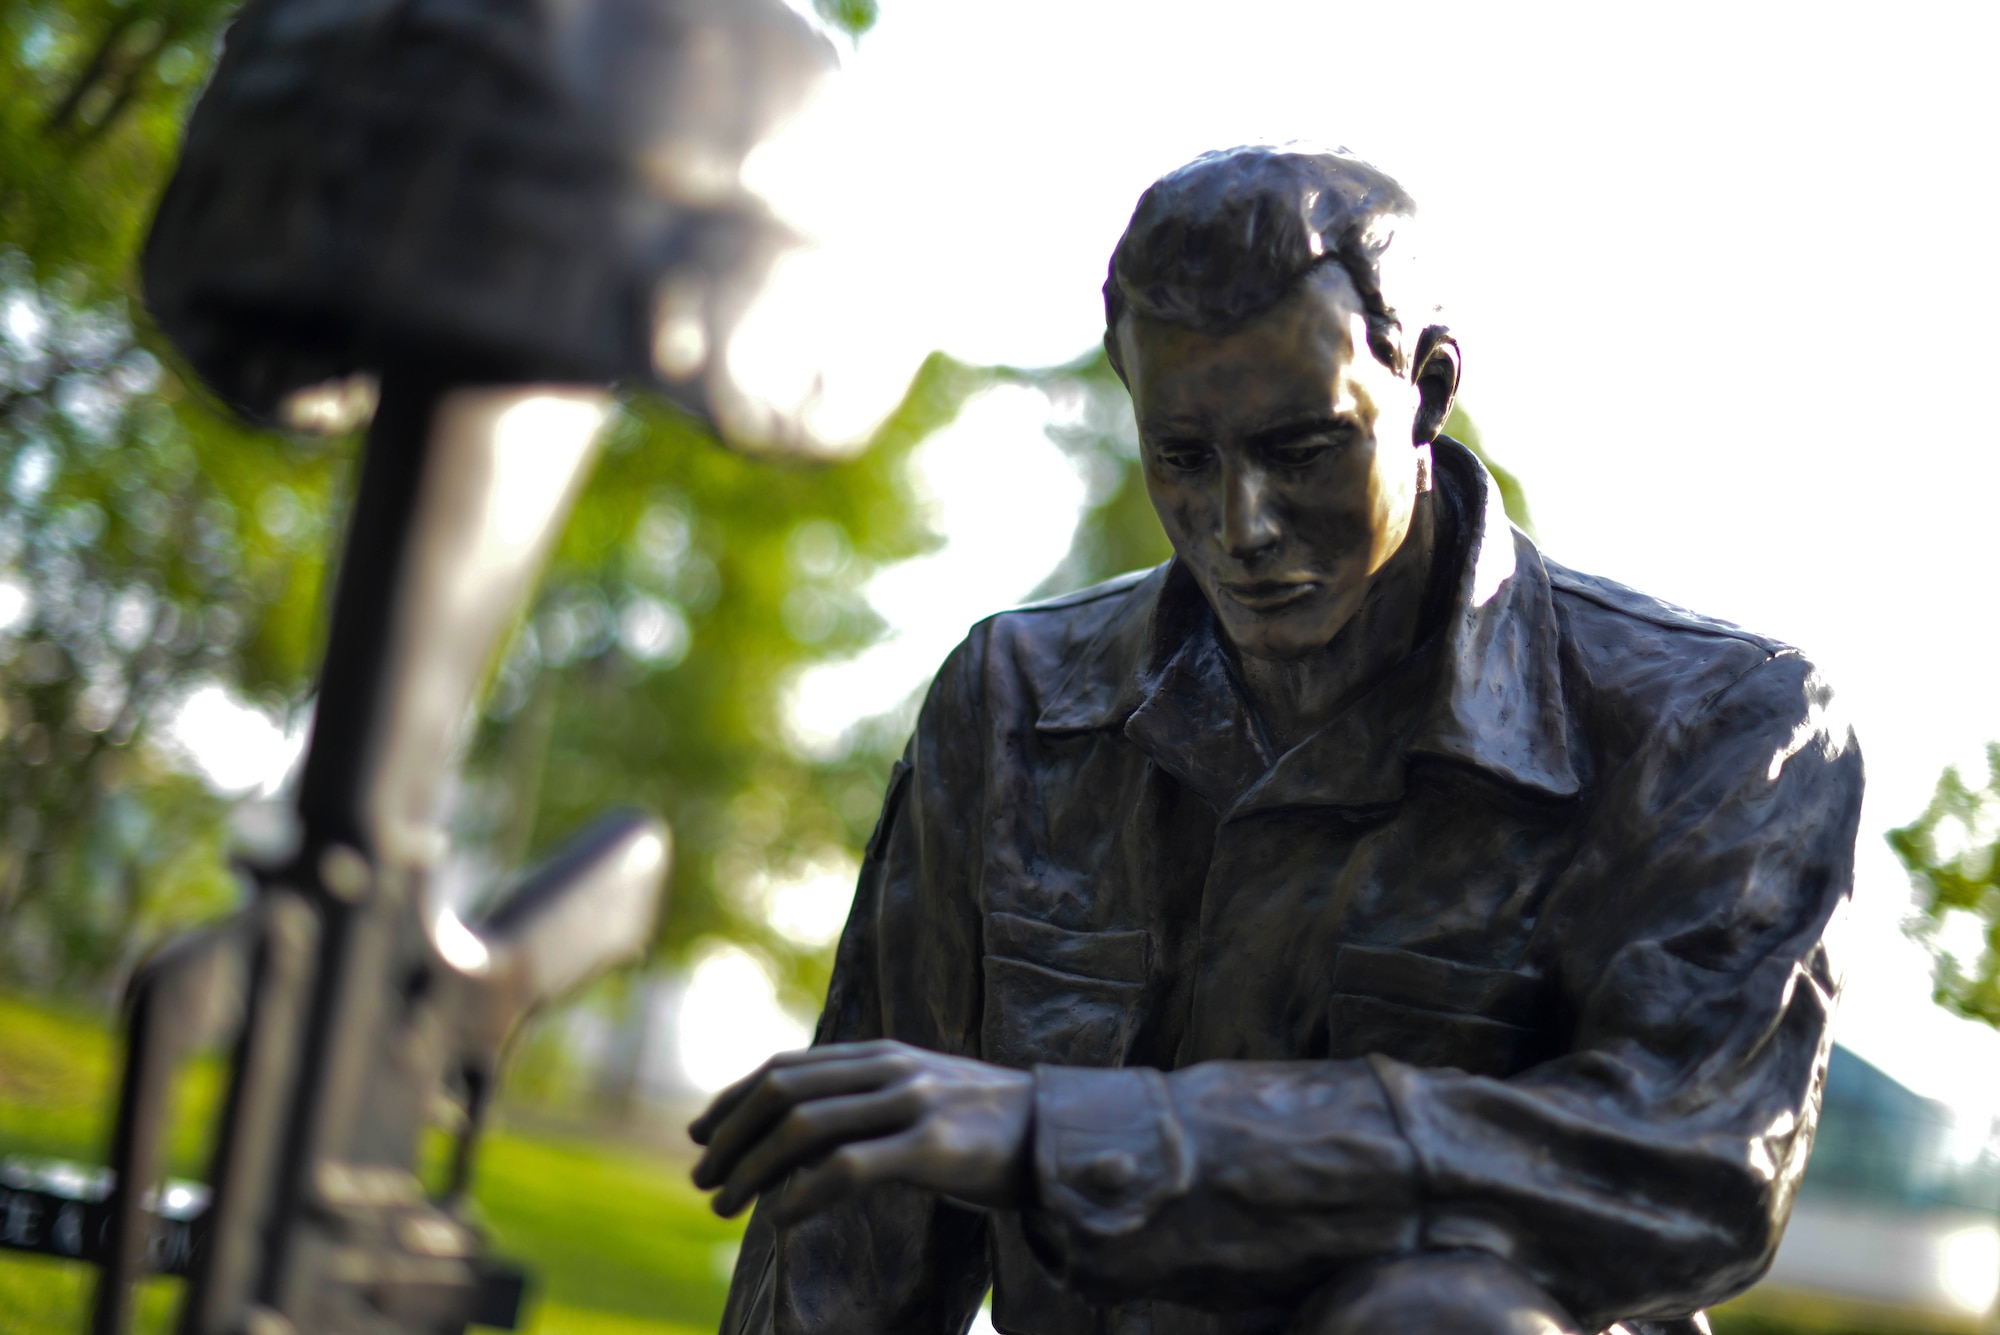 A bronze statue of a Soldier looking at a “battlefield cross” helps comprise the Operation Freedom Memorial in the Veteran’s Memorial Park, May 18, 2014, in Wichita, Kansas.  The monument is a symbol of tribute to Kansas fallen service members from Operation Desert Storm to current, ongoing conflicts in the war on terrorism. In addition of donations from many local organizations the past few years, the cost was of the monument was cut from $300,000 to $133,000. (U.S. Air Force photo/Staff Sgt. Jess Lockoski) 